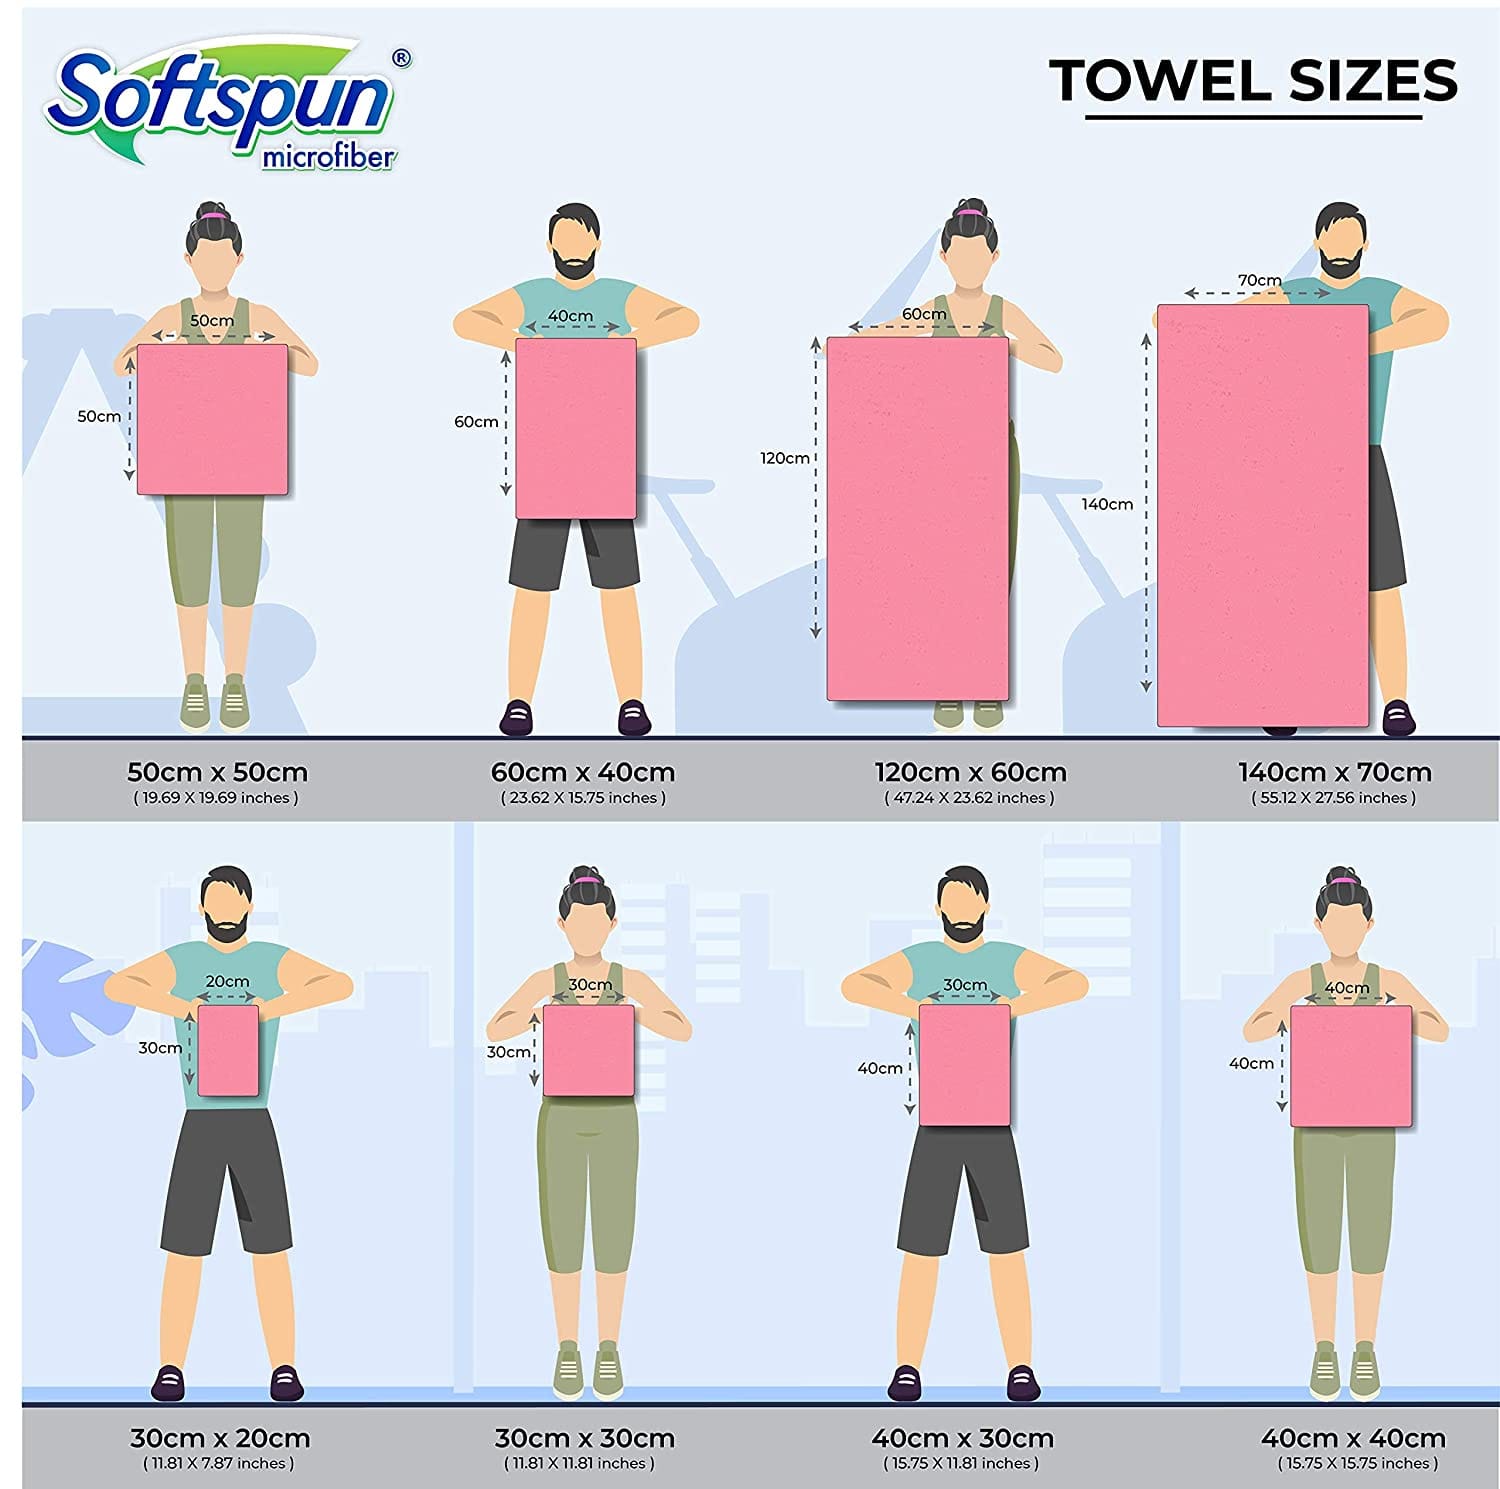 SOFTSPUN Microfiber Small Wipes 20x30Cms, 15 Piece Towel Set, 380 GSM, Multi-Purpose Super Soft Absorbent Cleaning Towels, Cleans & Polishes Everything in Your Home, Kitchen & Office.